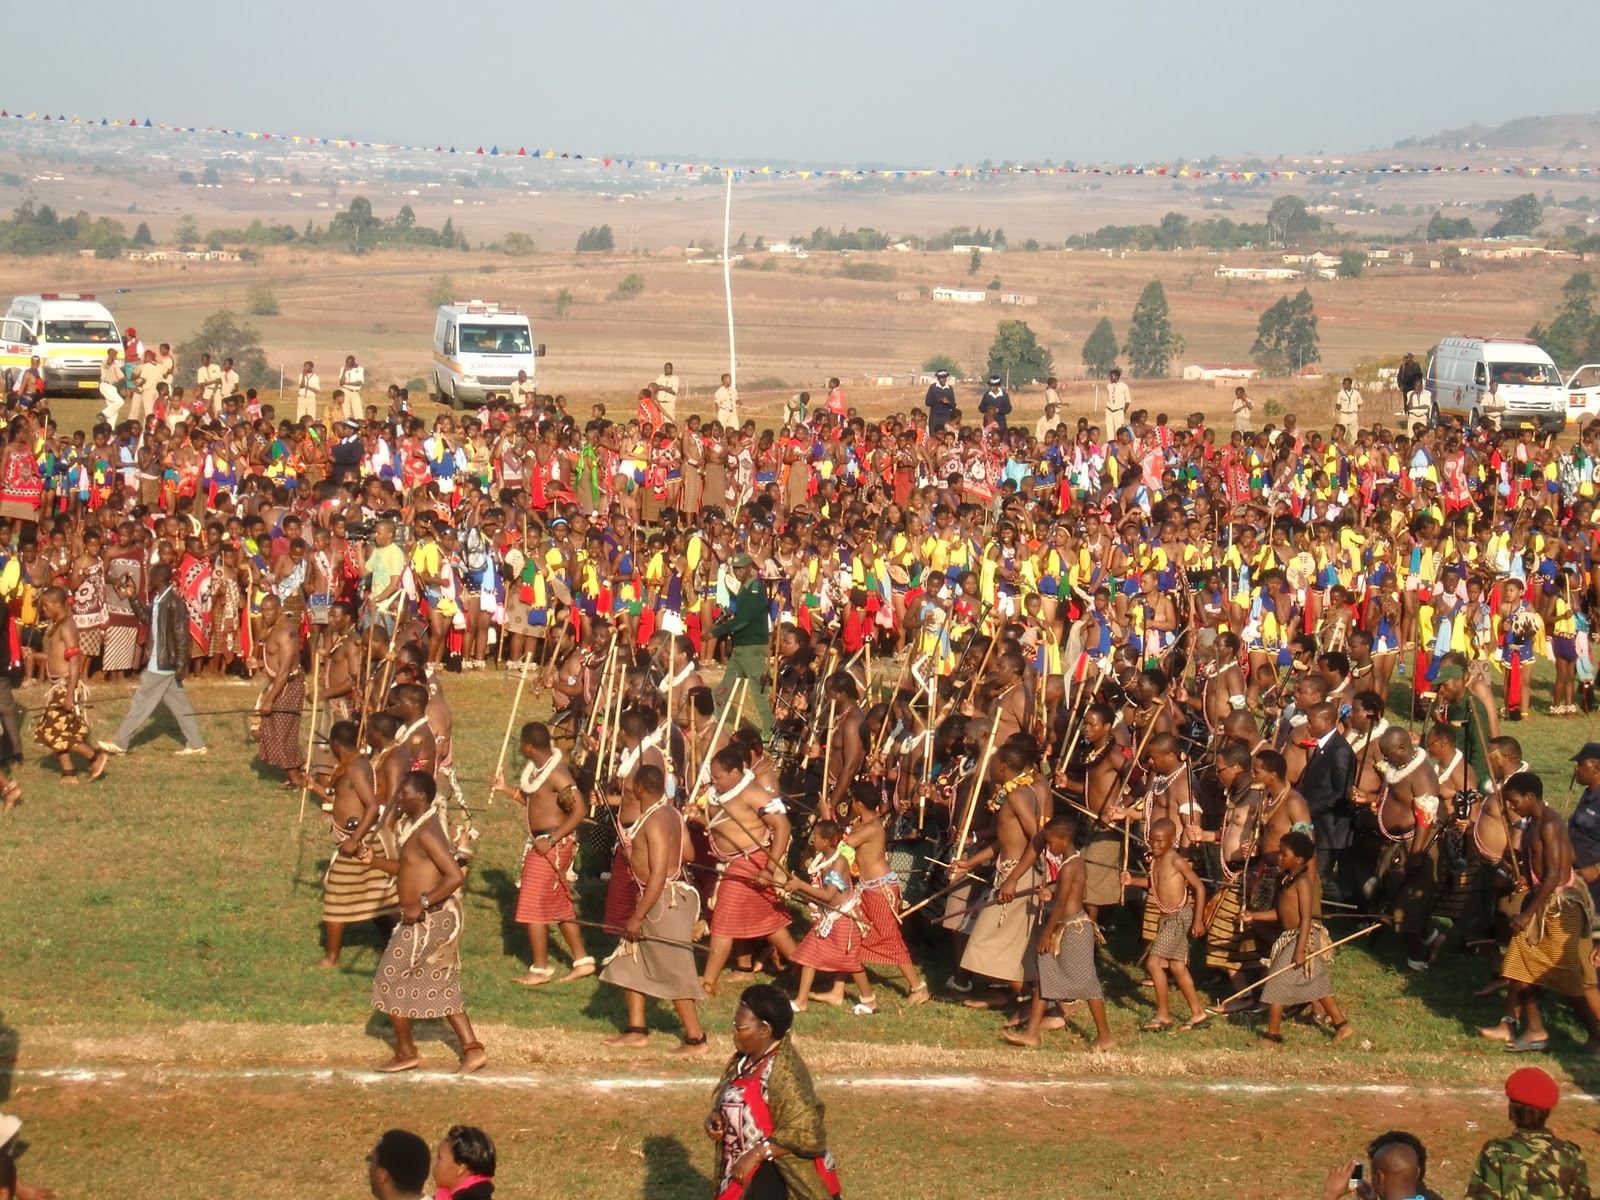 Alex's PULSE Blog - six months in Swaziland: Umhlanga / Reed Dance